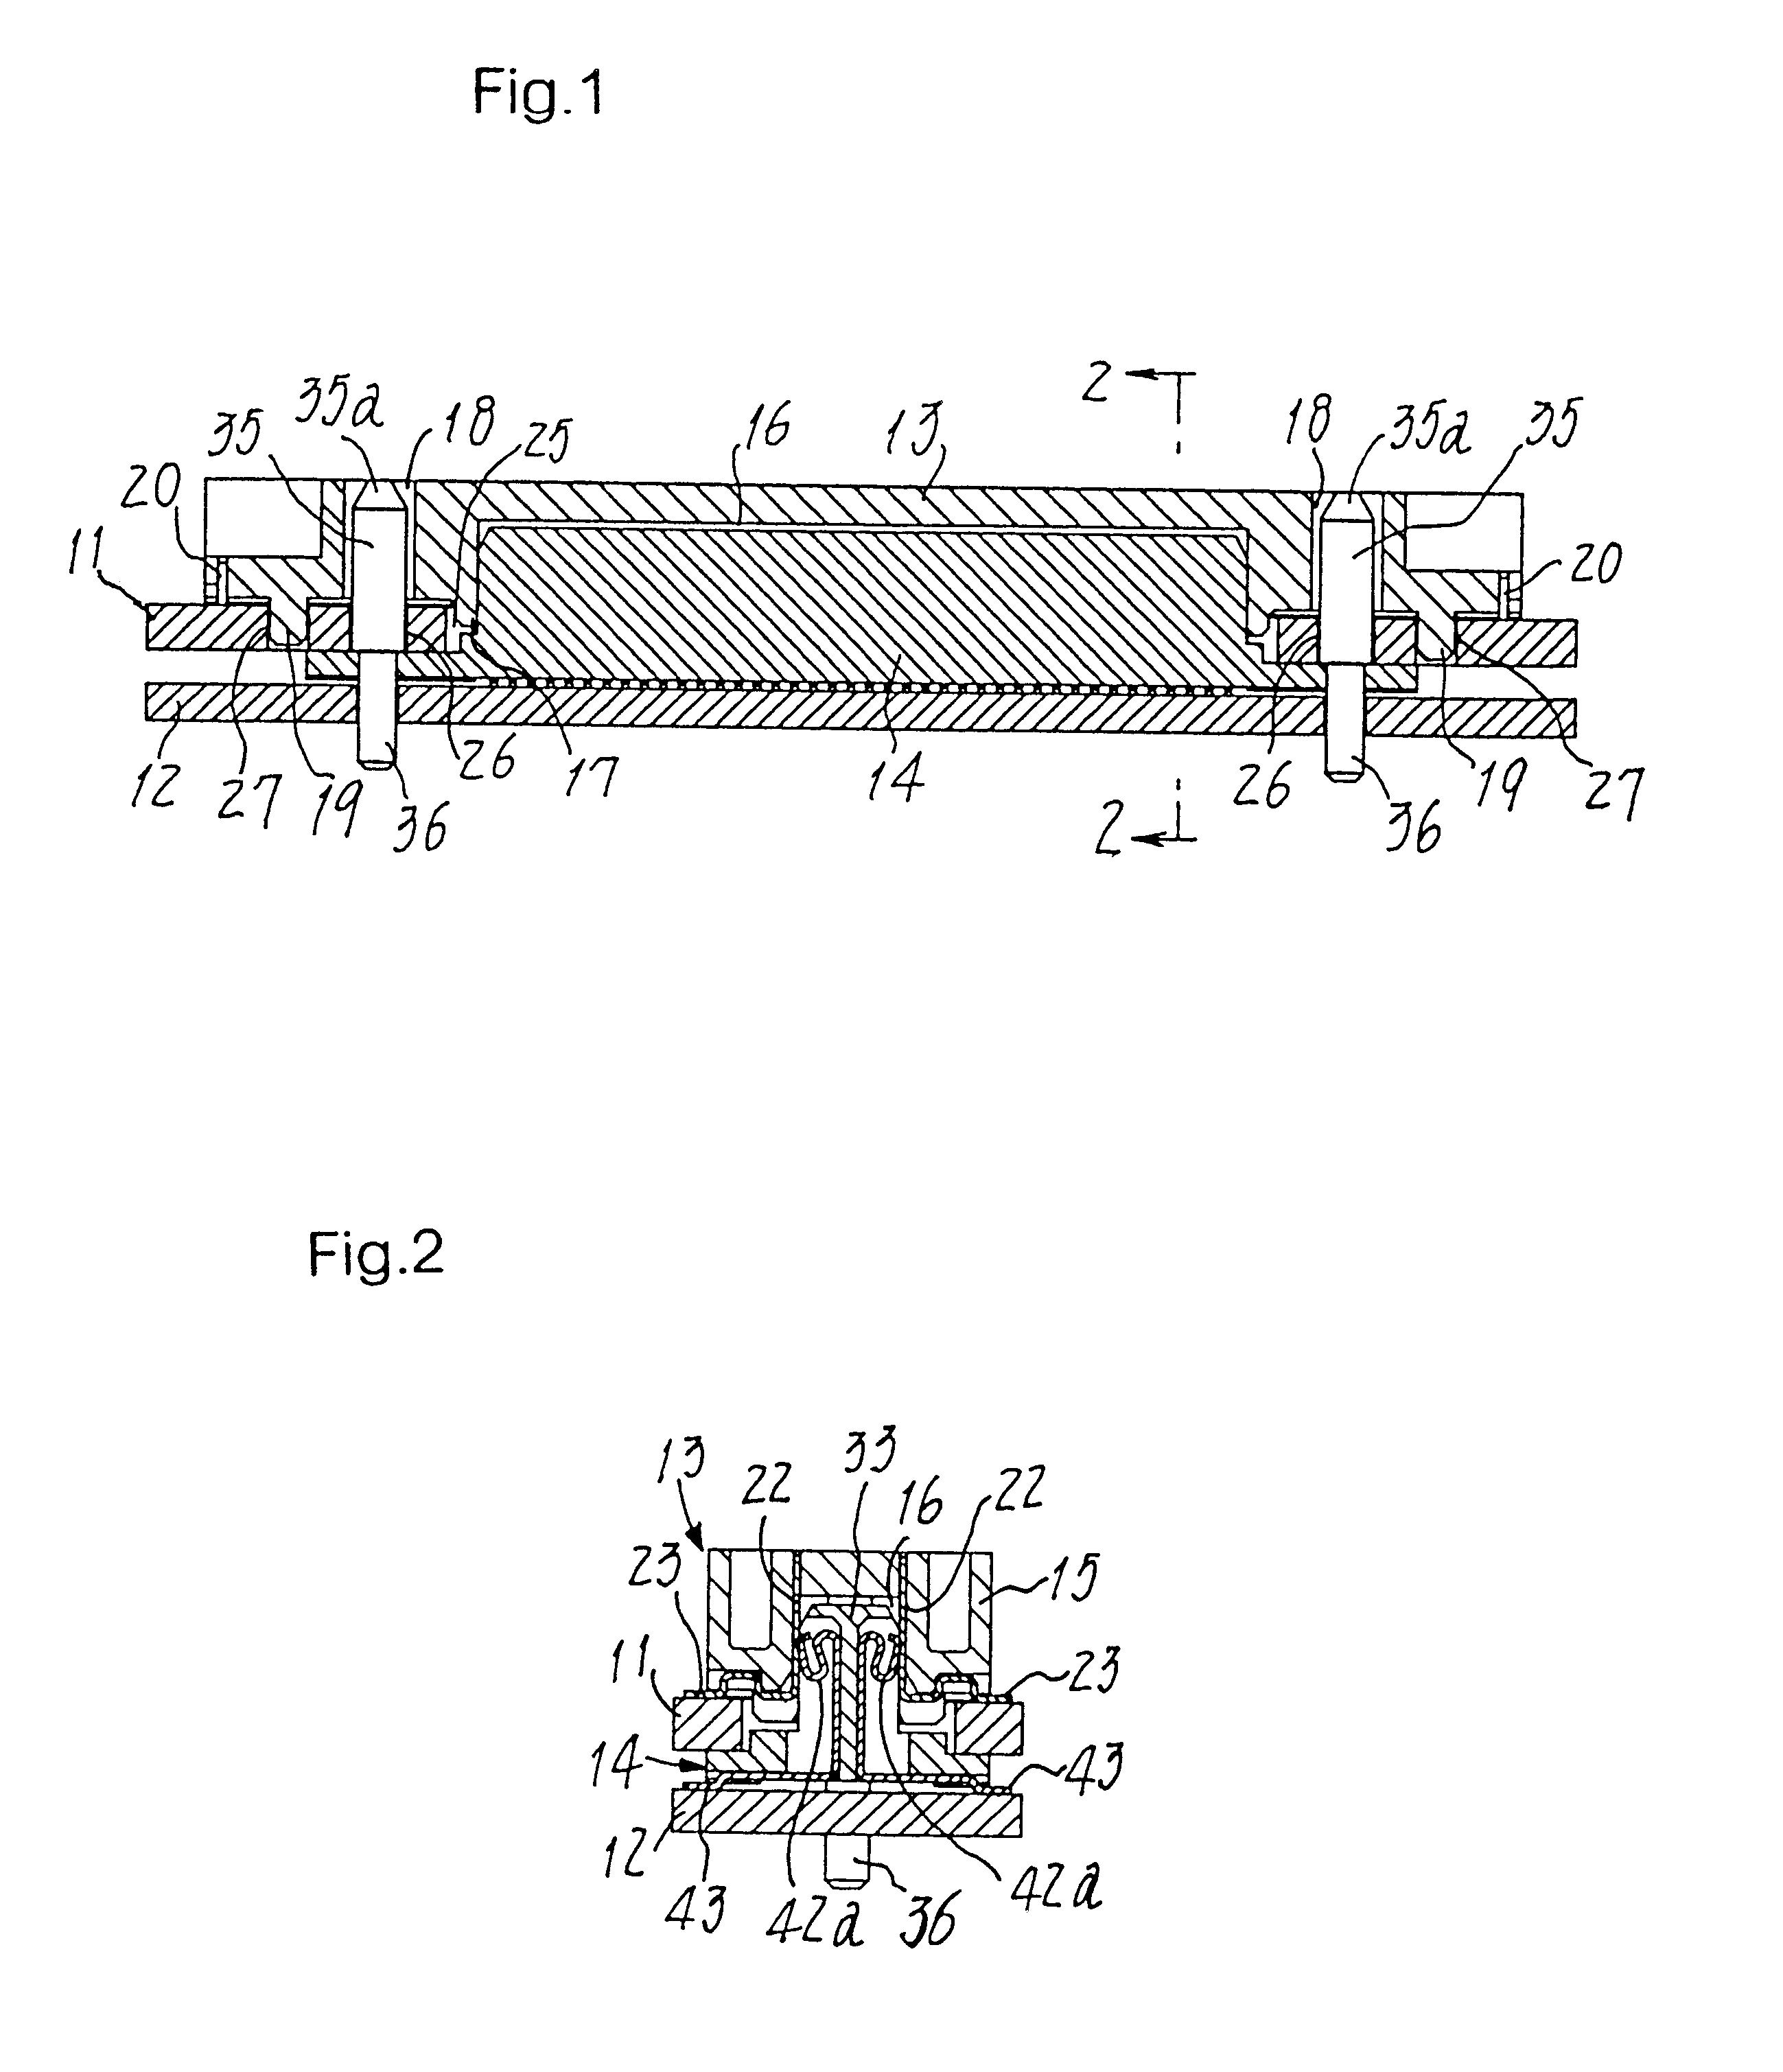 Connective structure for coupling printed circuit boards